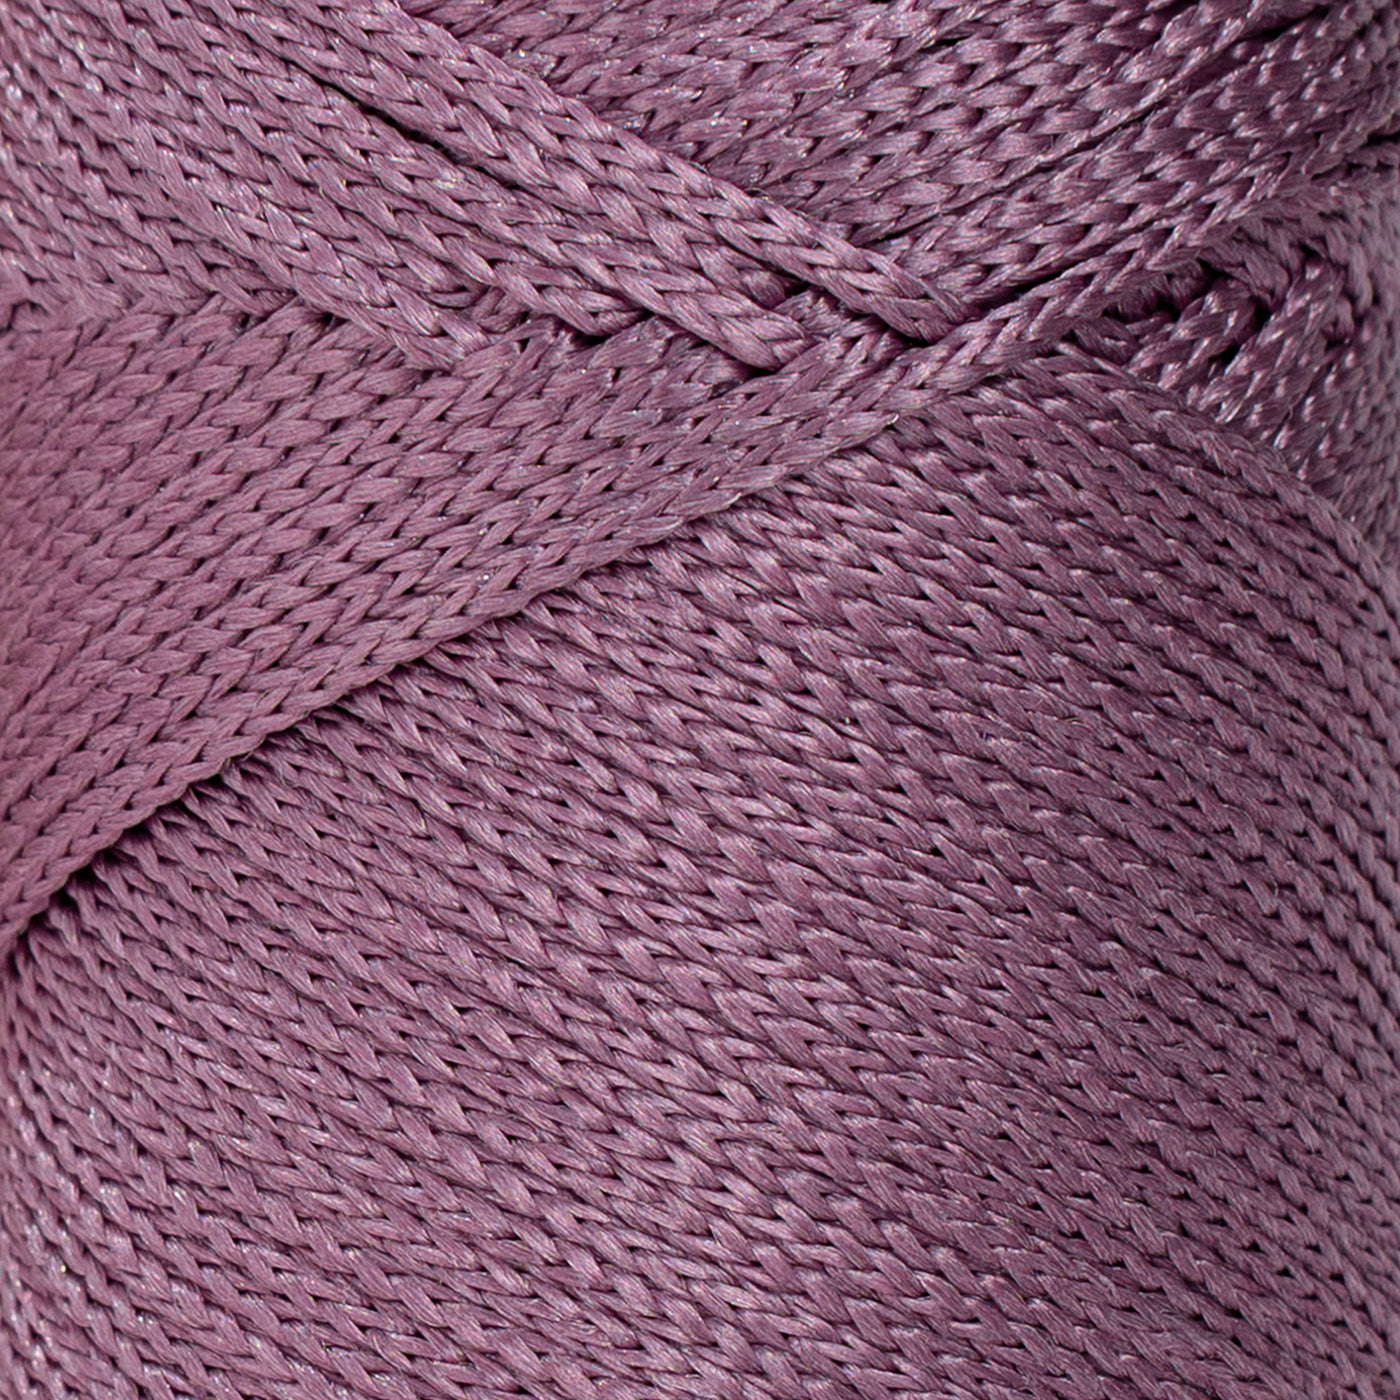 Outdoor 3 mm Macrame Braided Cord – Lavender Color